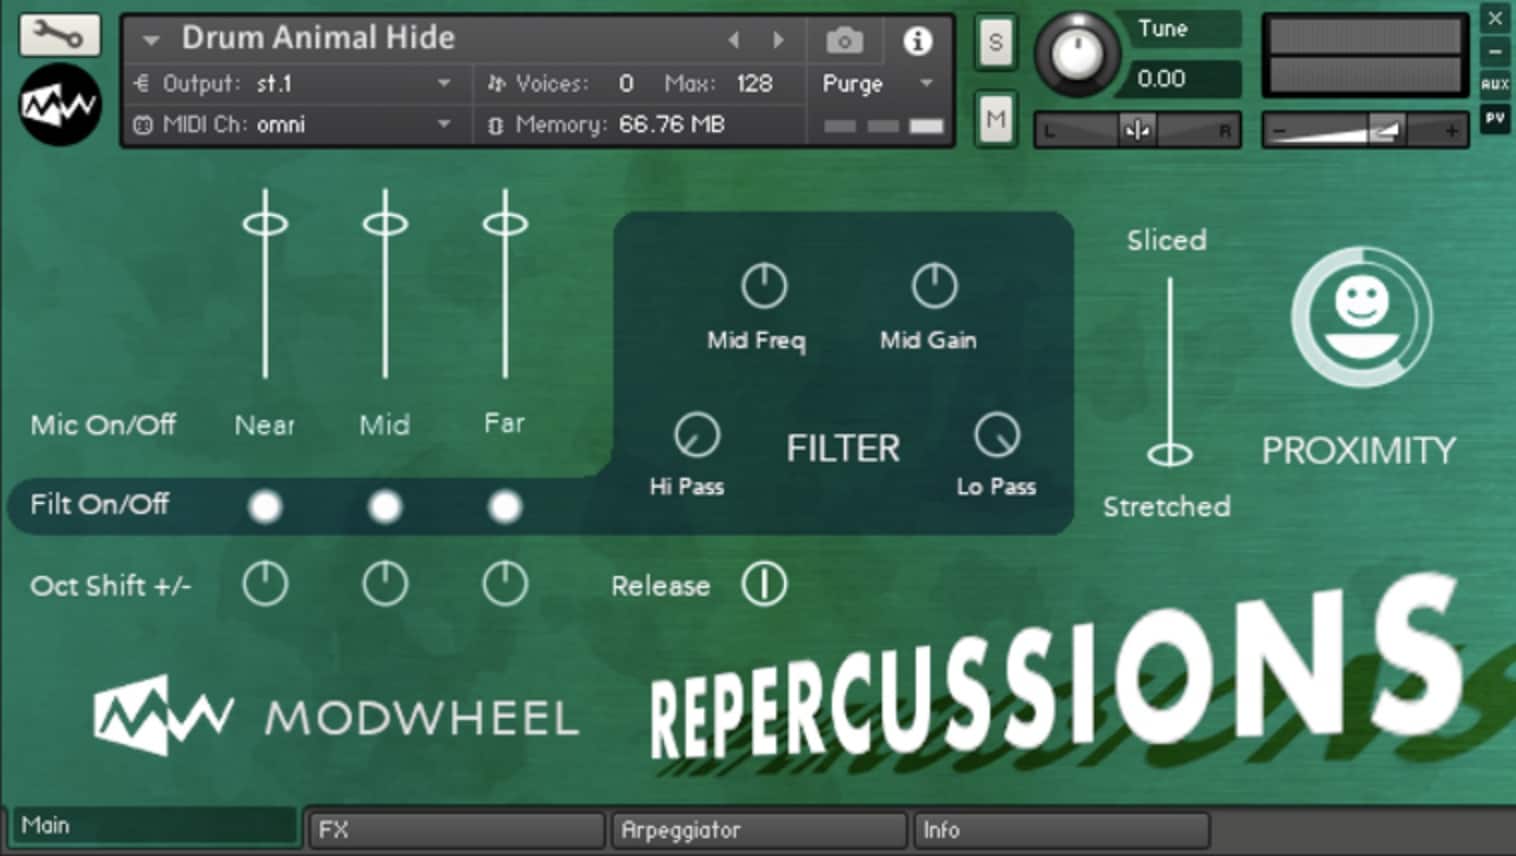 Get Excited for Modwheel’s Launch of REPERCUSSIONS: Kontakt Percussive Instruments and More